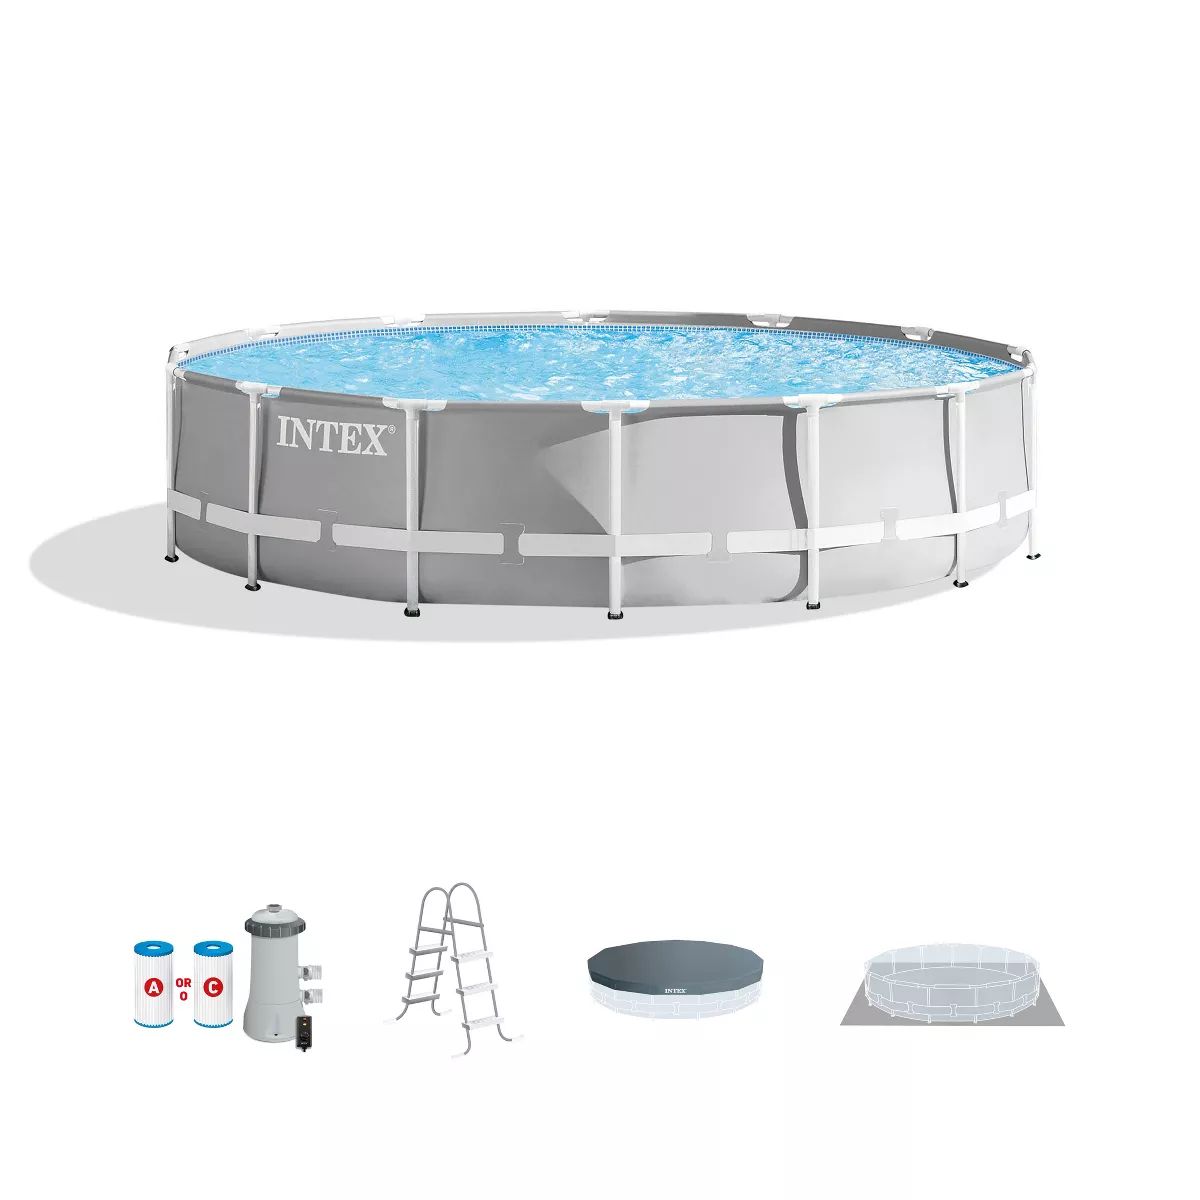 Intex 26719EH 14ft x 42in Prism Frame Above Ground Swimming Pool with Pump | Target